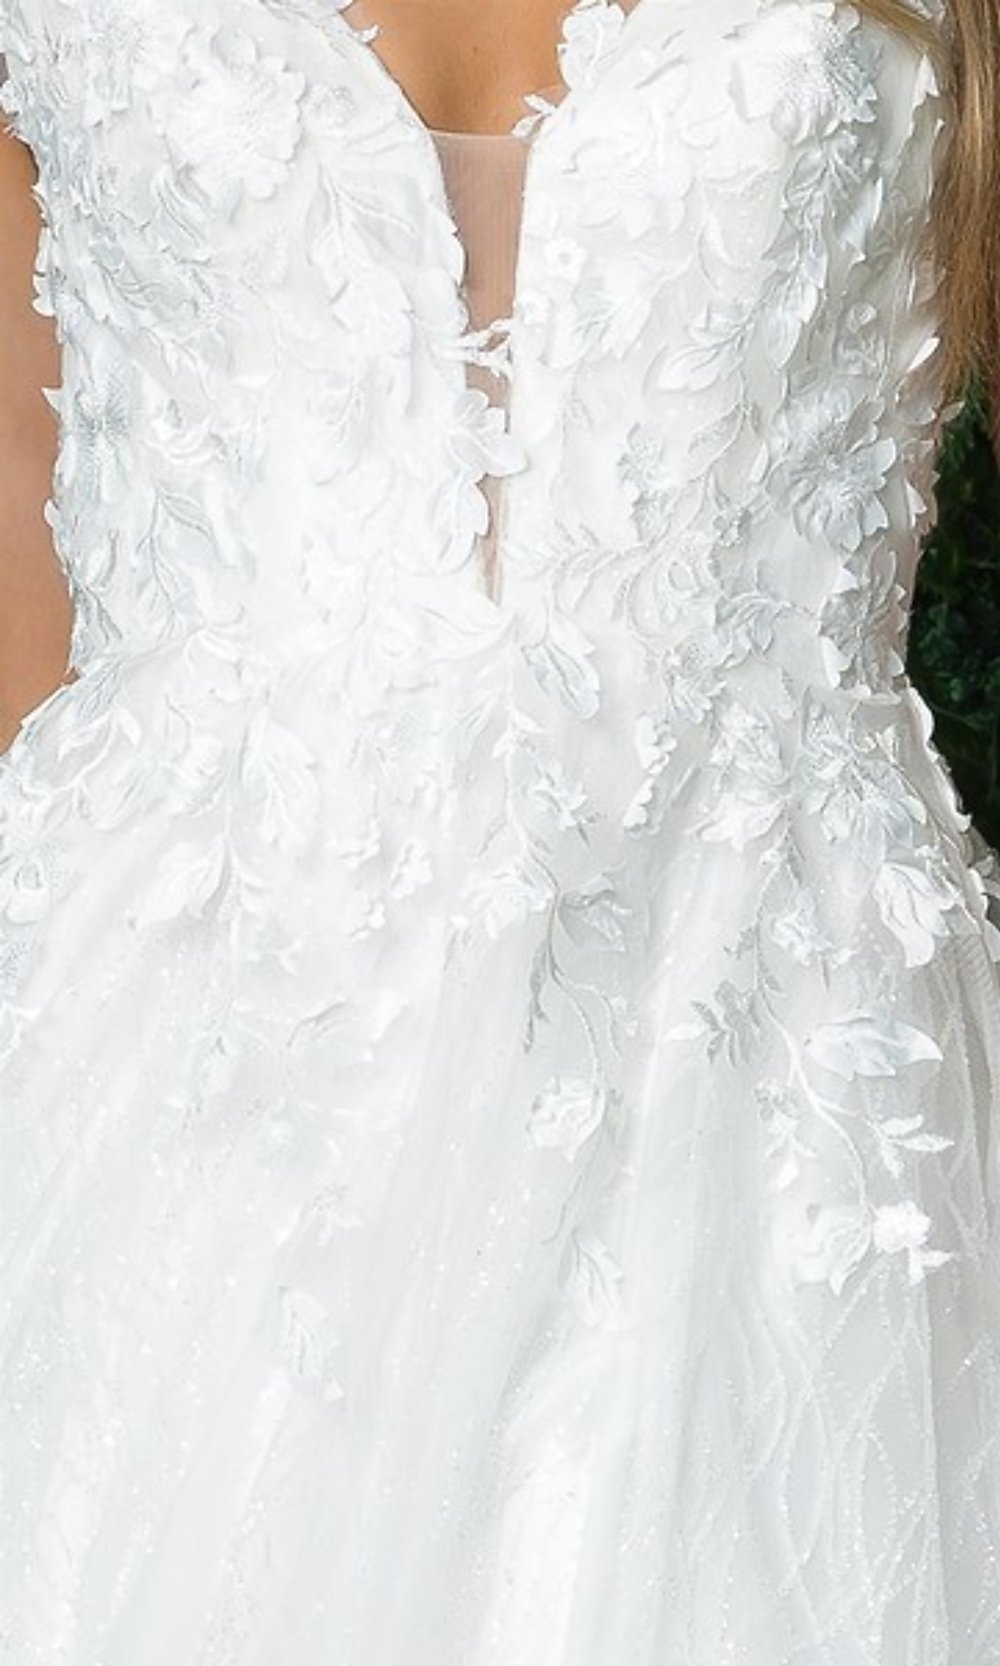  Long White Ball Gown with Floral Appliques